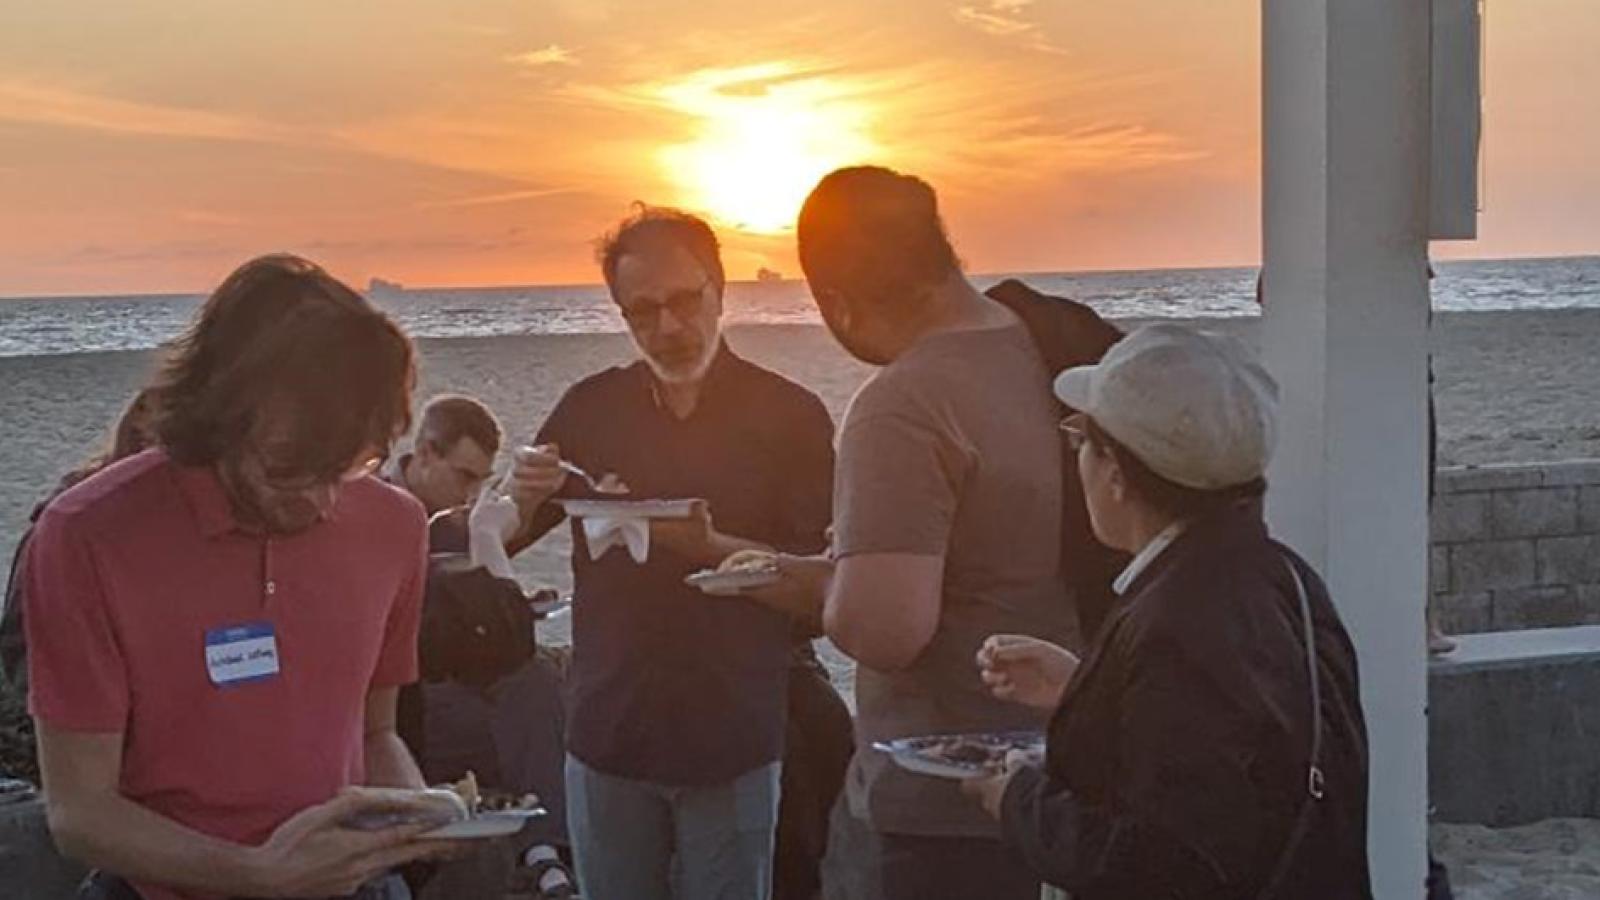 people eating dinner on the beach at sunset